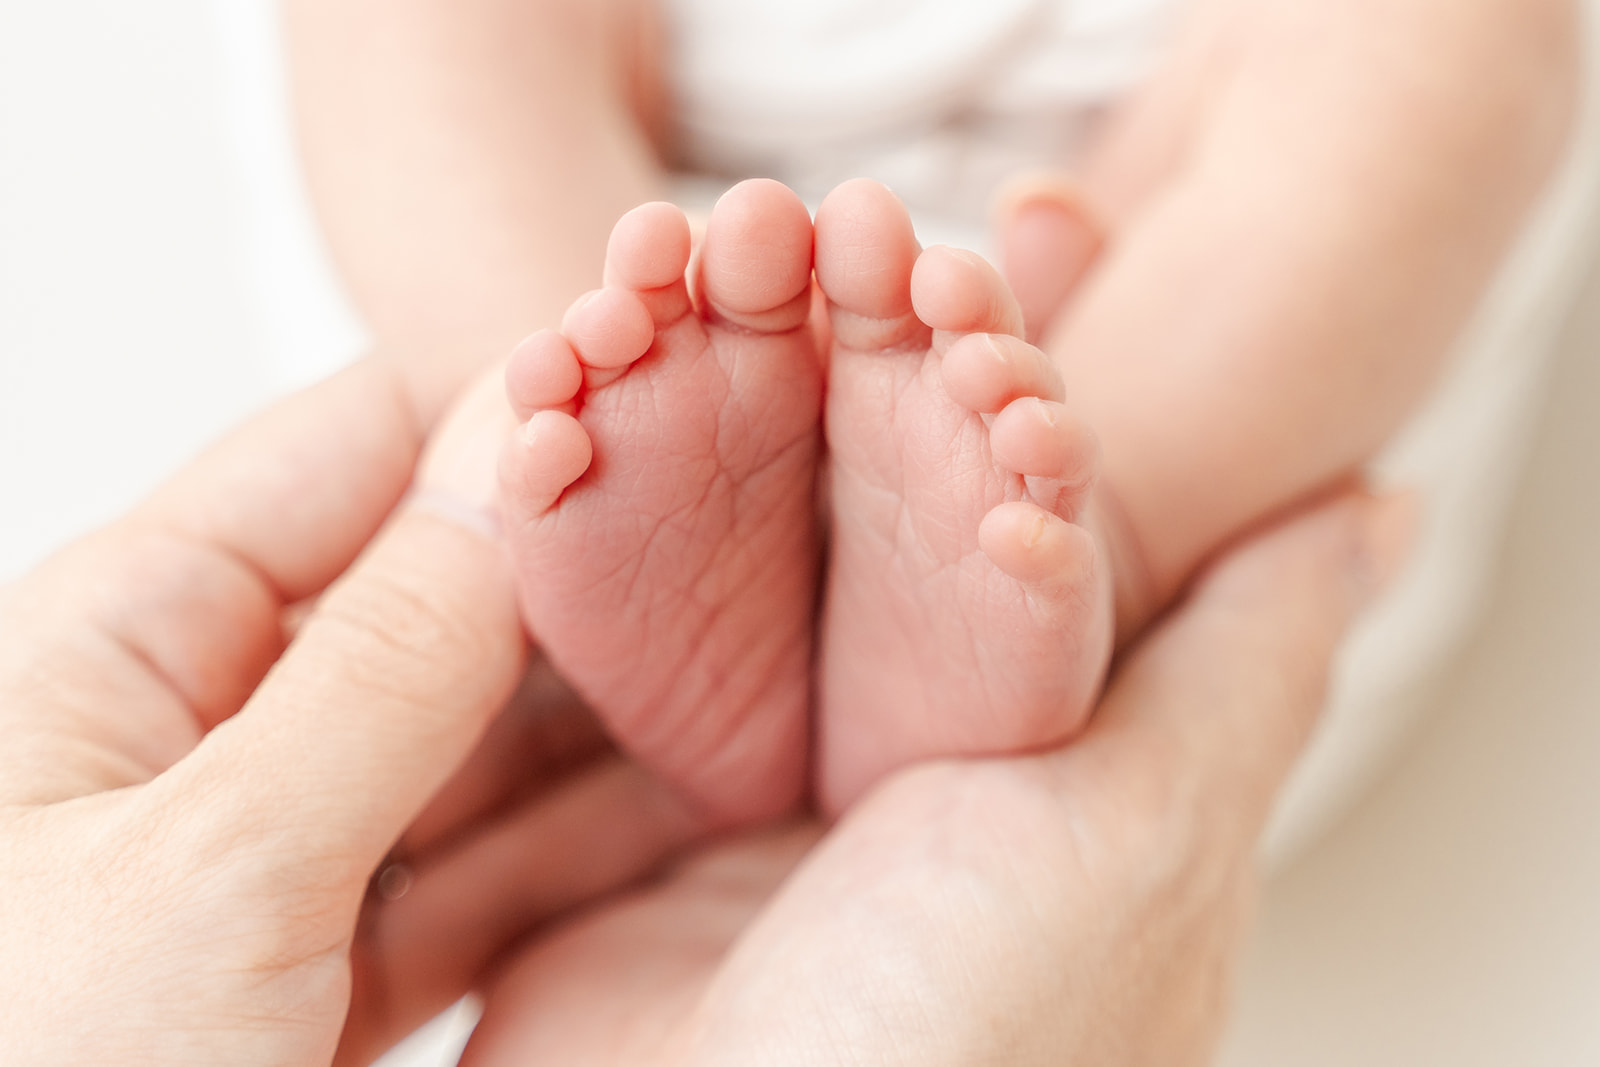 Details of a newborn baby's feet in mom's hands